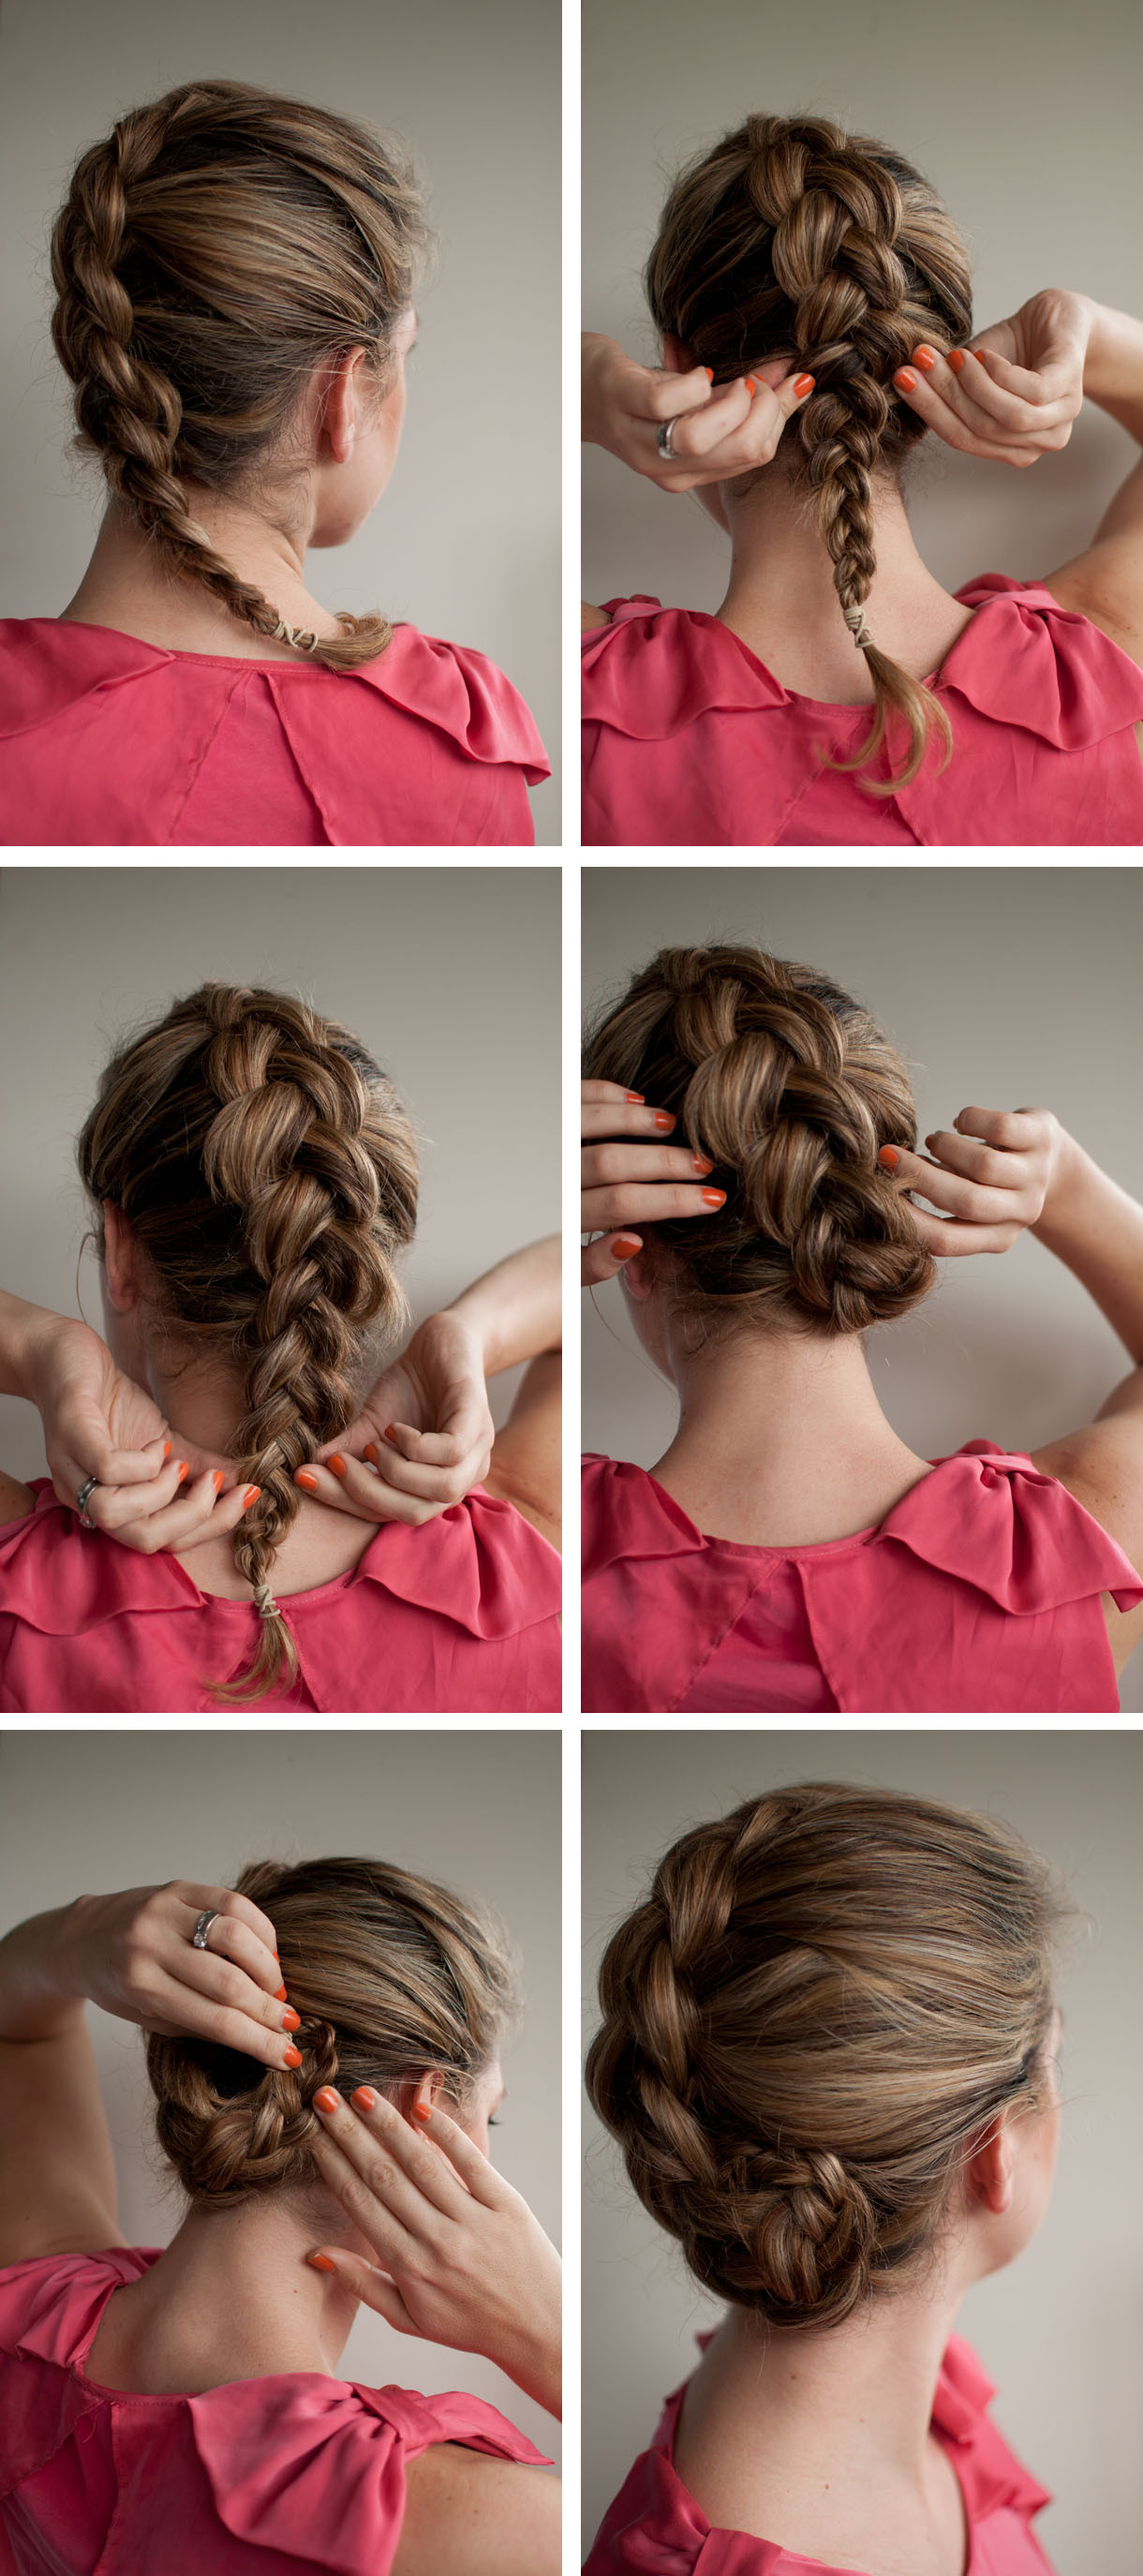 Easy Braided Hairstyles To Do Yourself
 Braided upstyle Hair Romance on Latest Hairstyles Hair